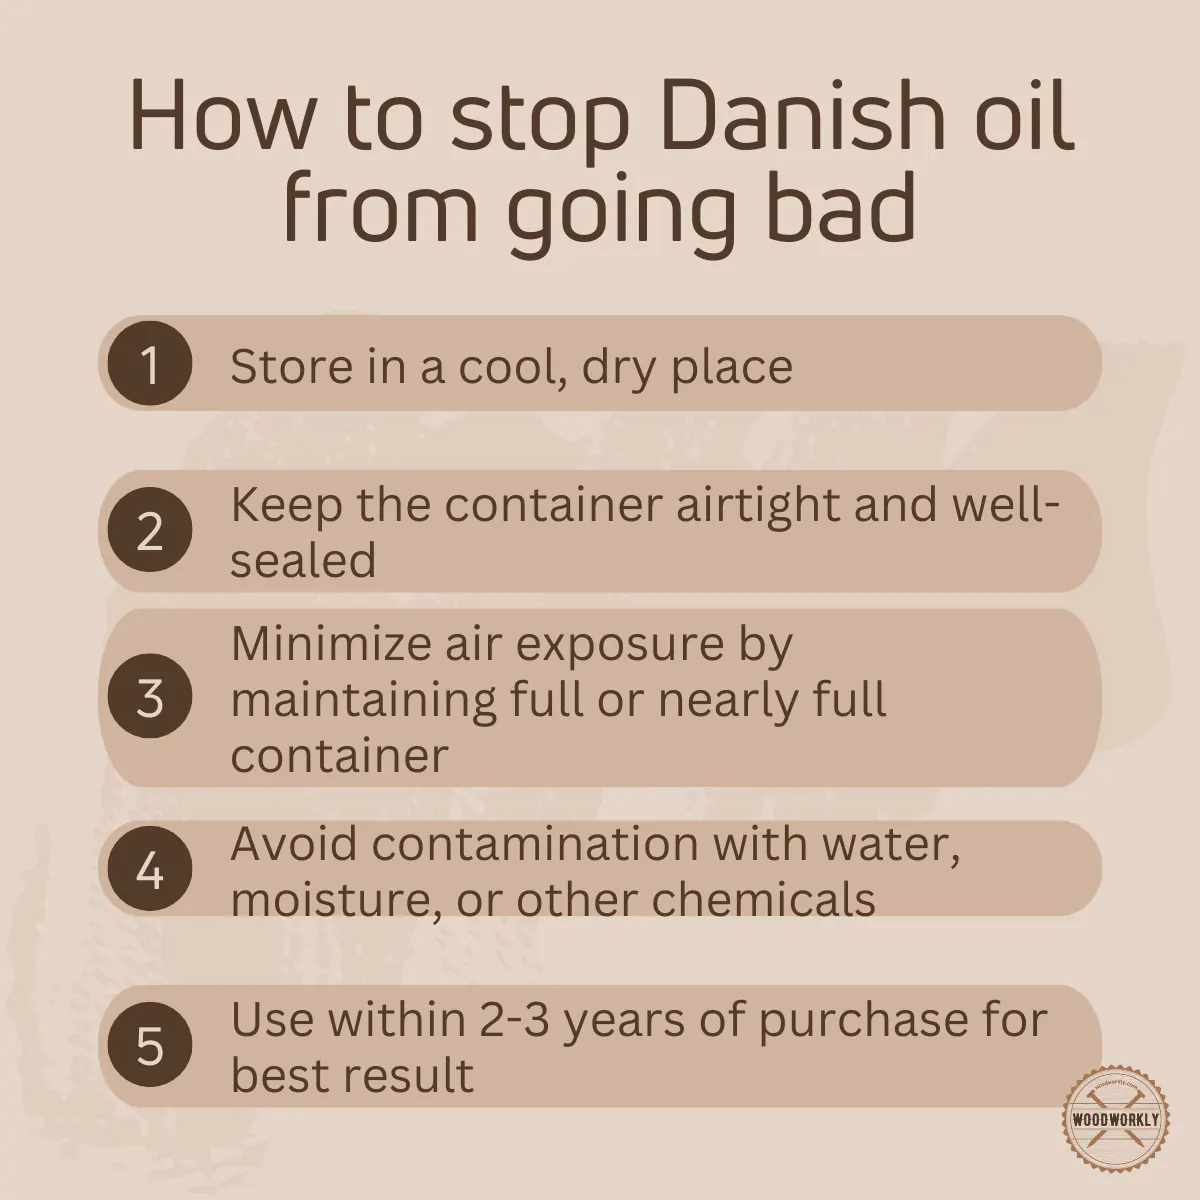 How to stop Danish oil from going bad